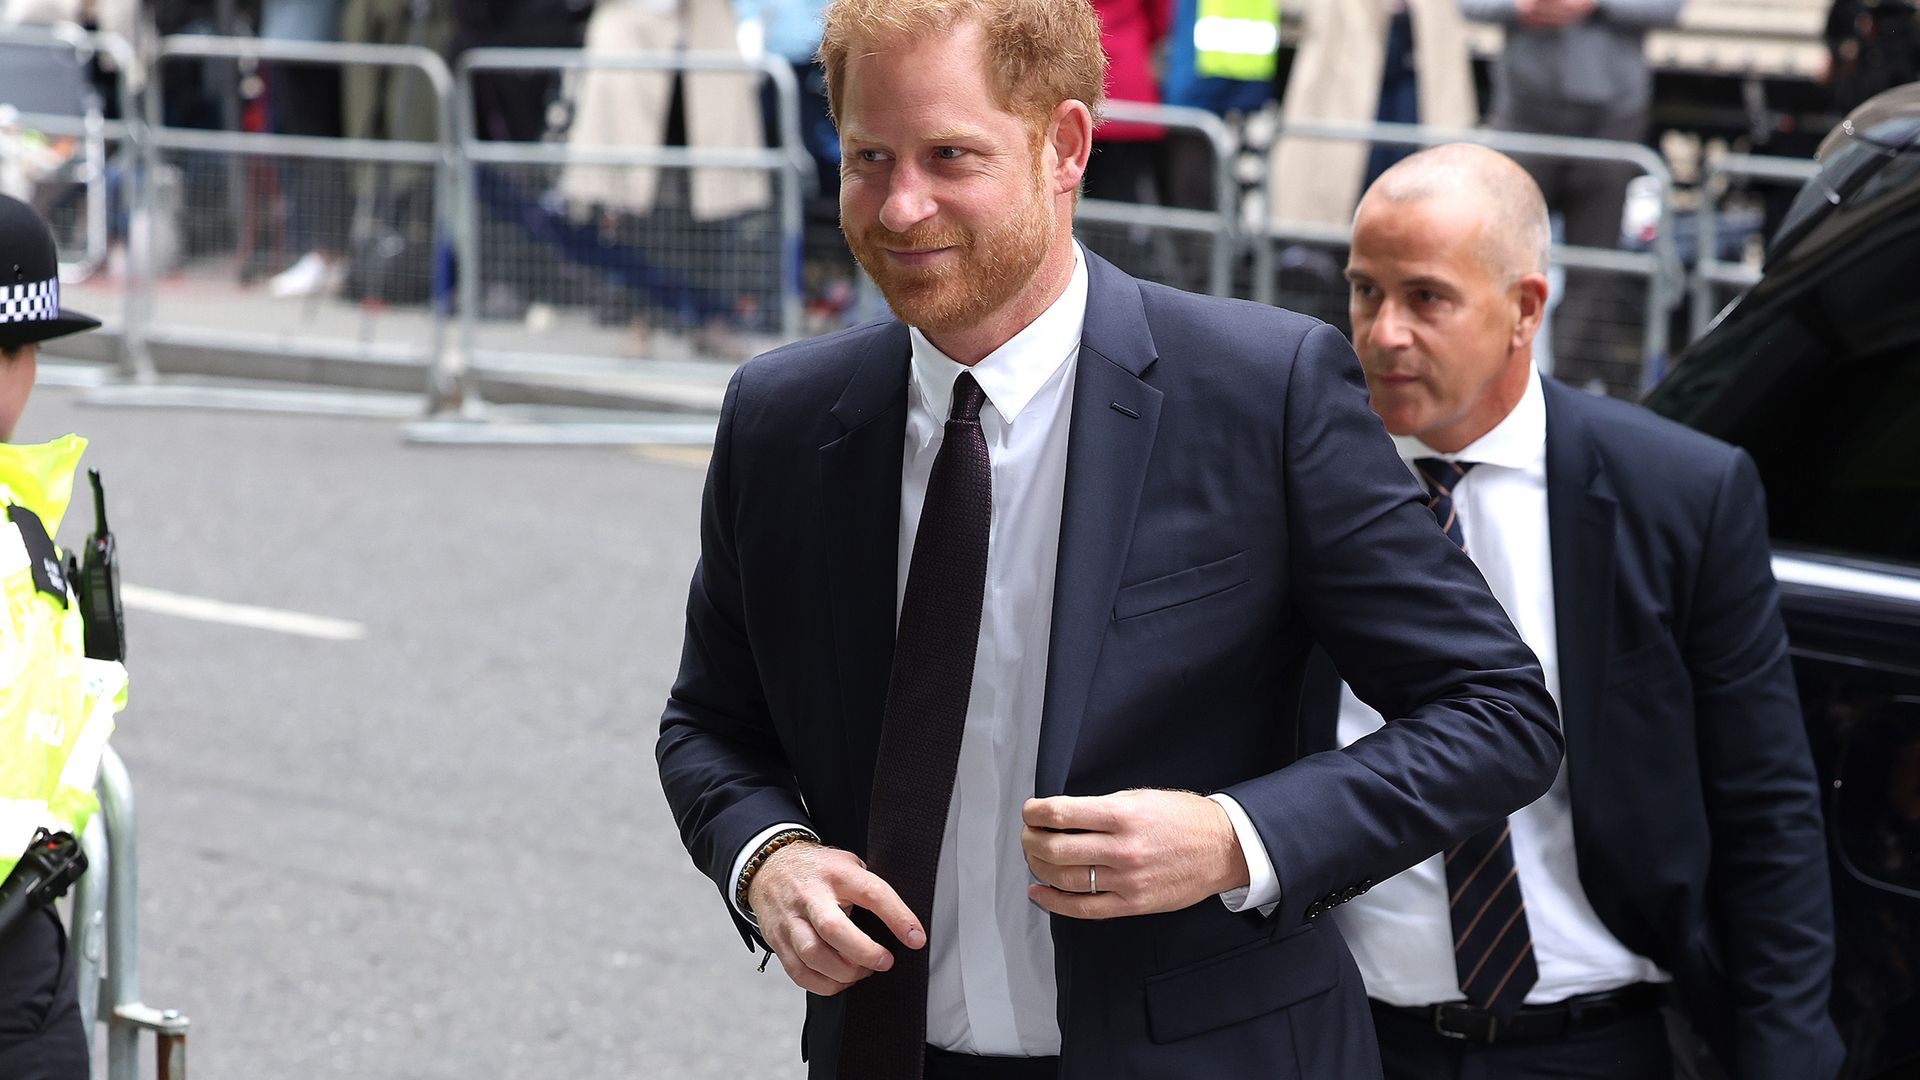 Prince Harry arrives for second day in court – photos and details